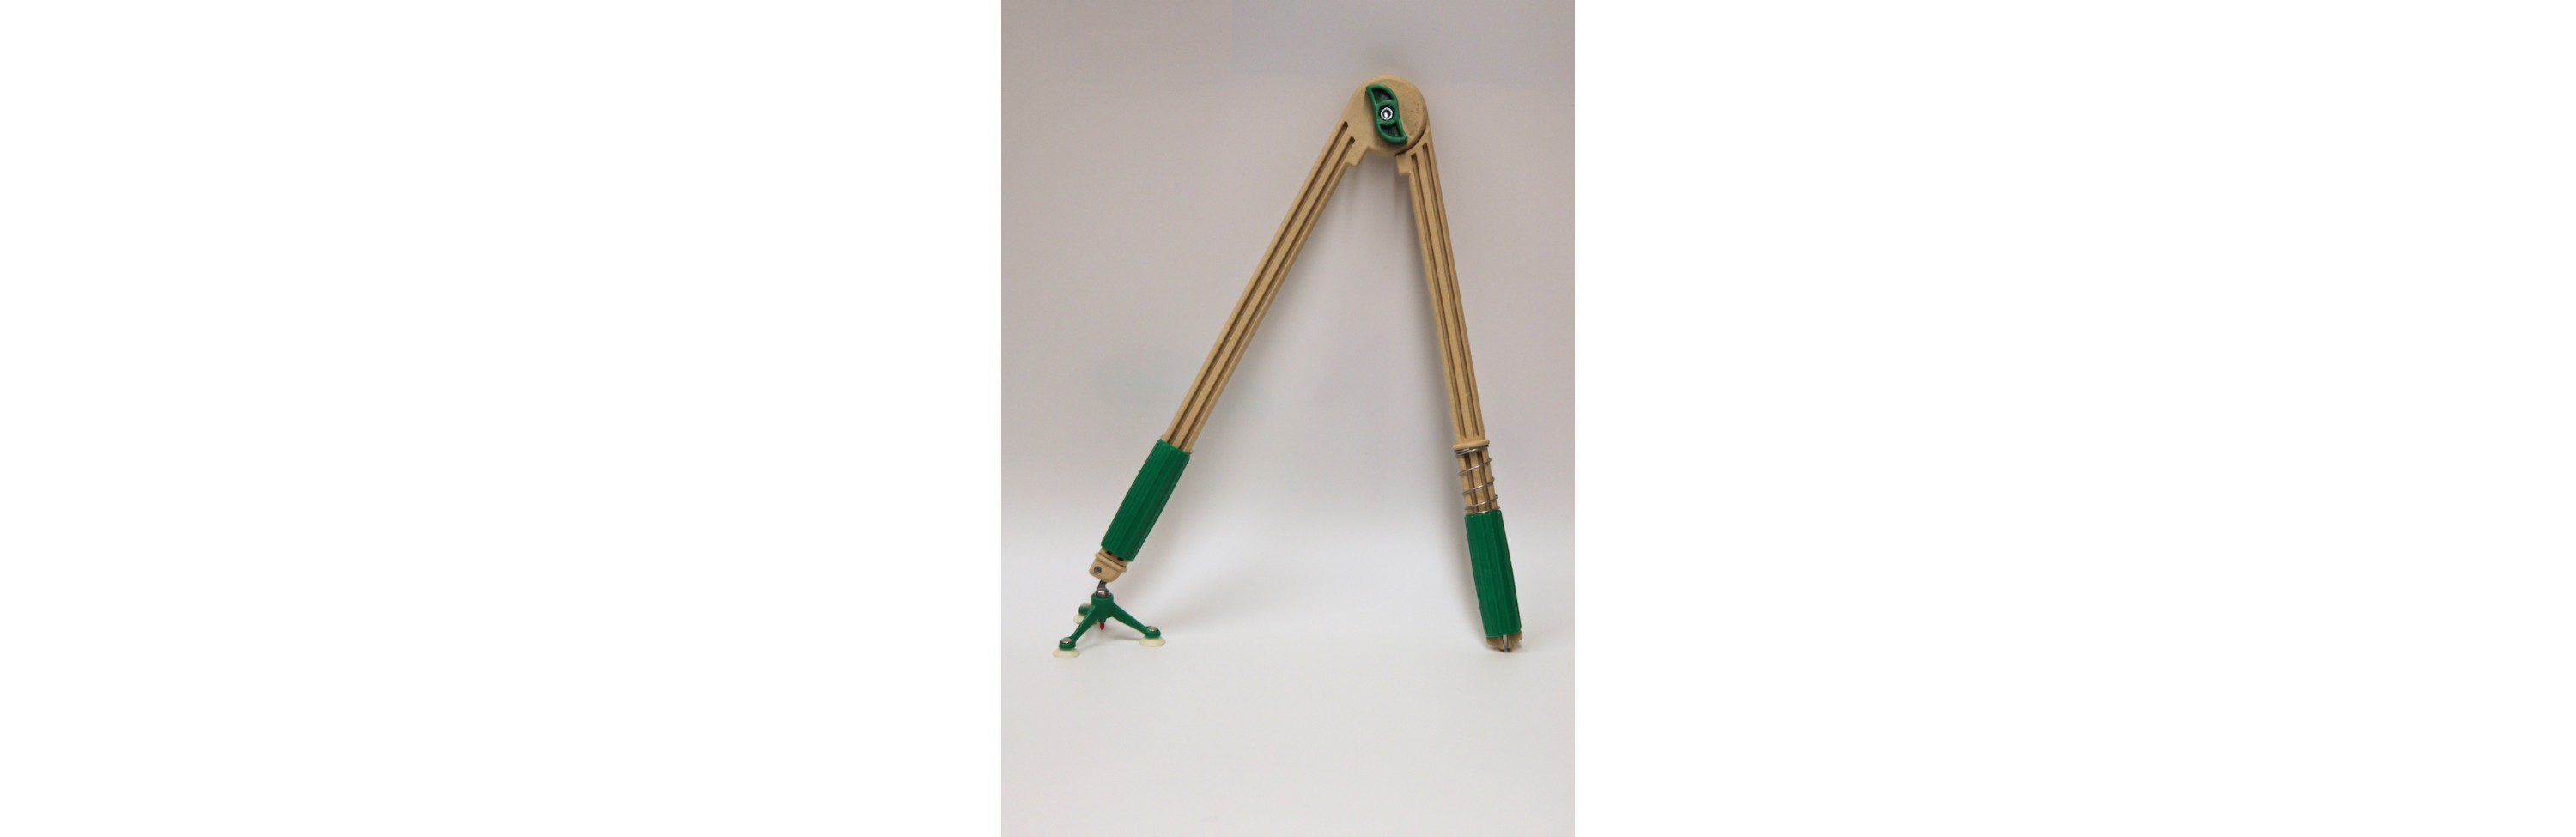 Wissner® active learning - RE-Wood® Compass with turning handle and threefoot